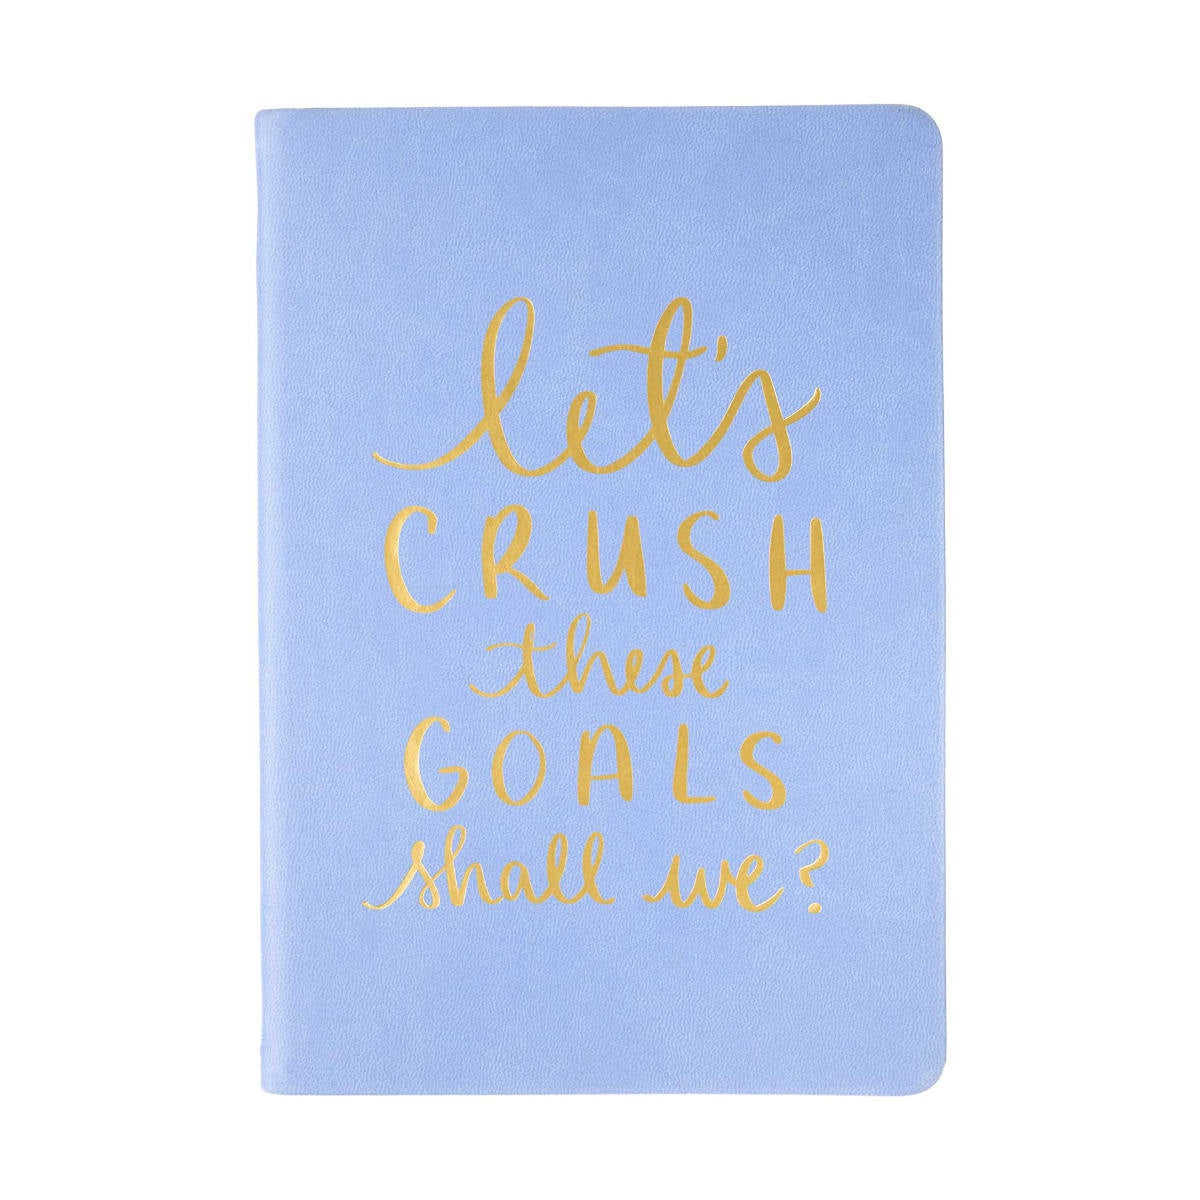 Dayna Lee Journal: Crush These Goals